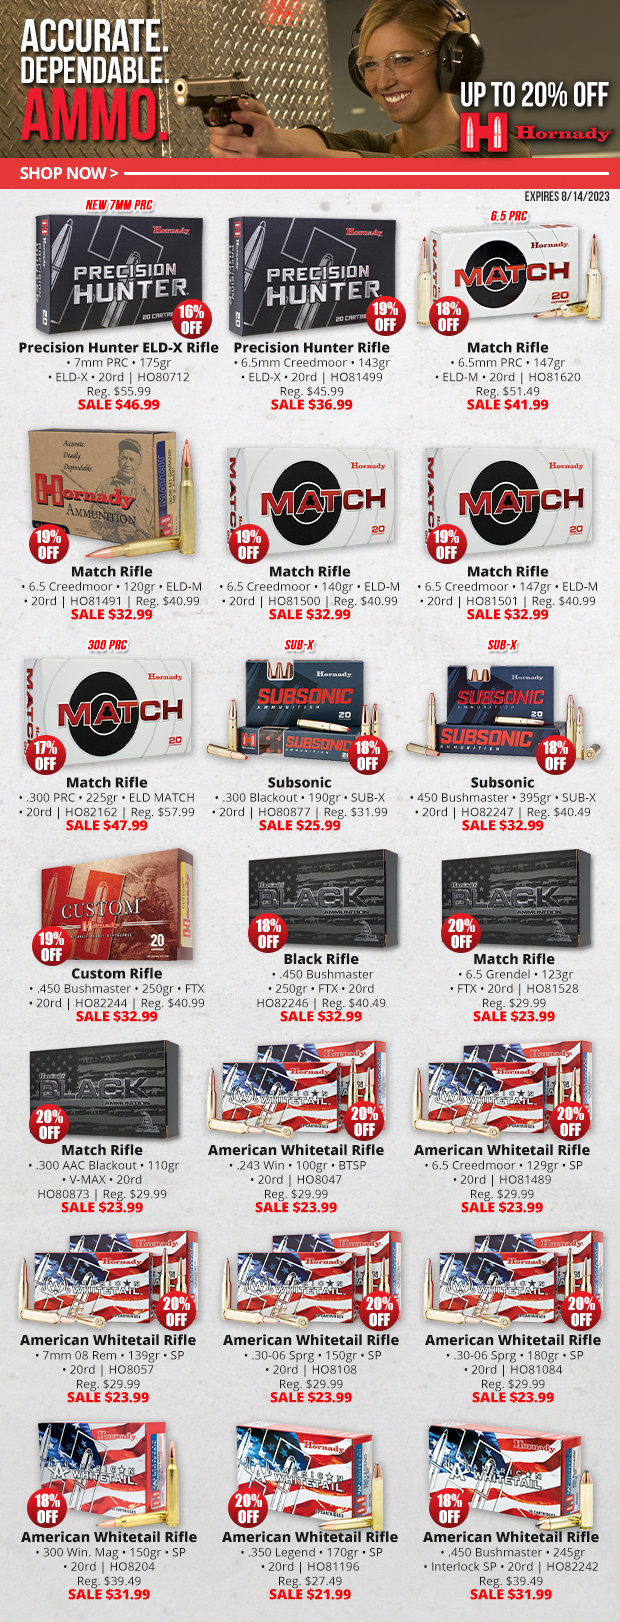 Shop Ammo Mix Monday with Up to 20% Off Hornady